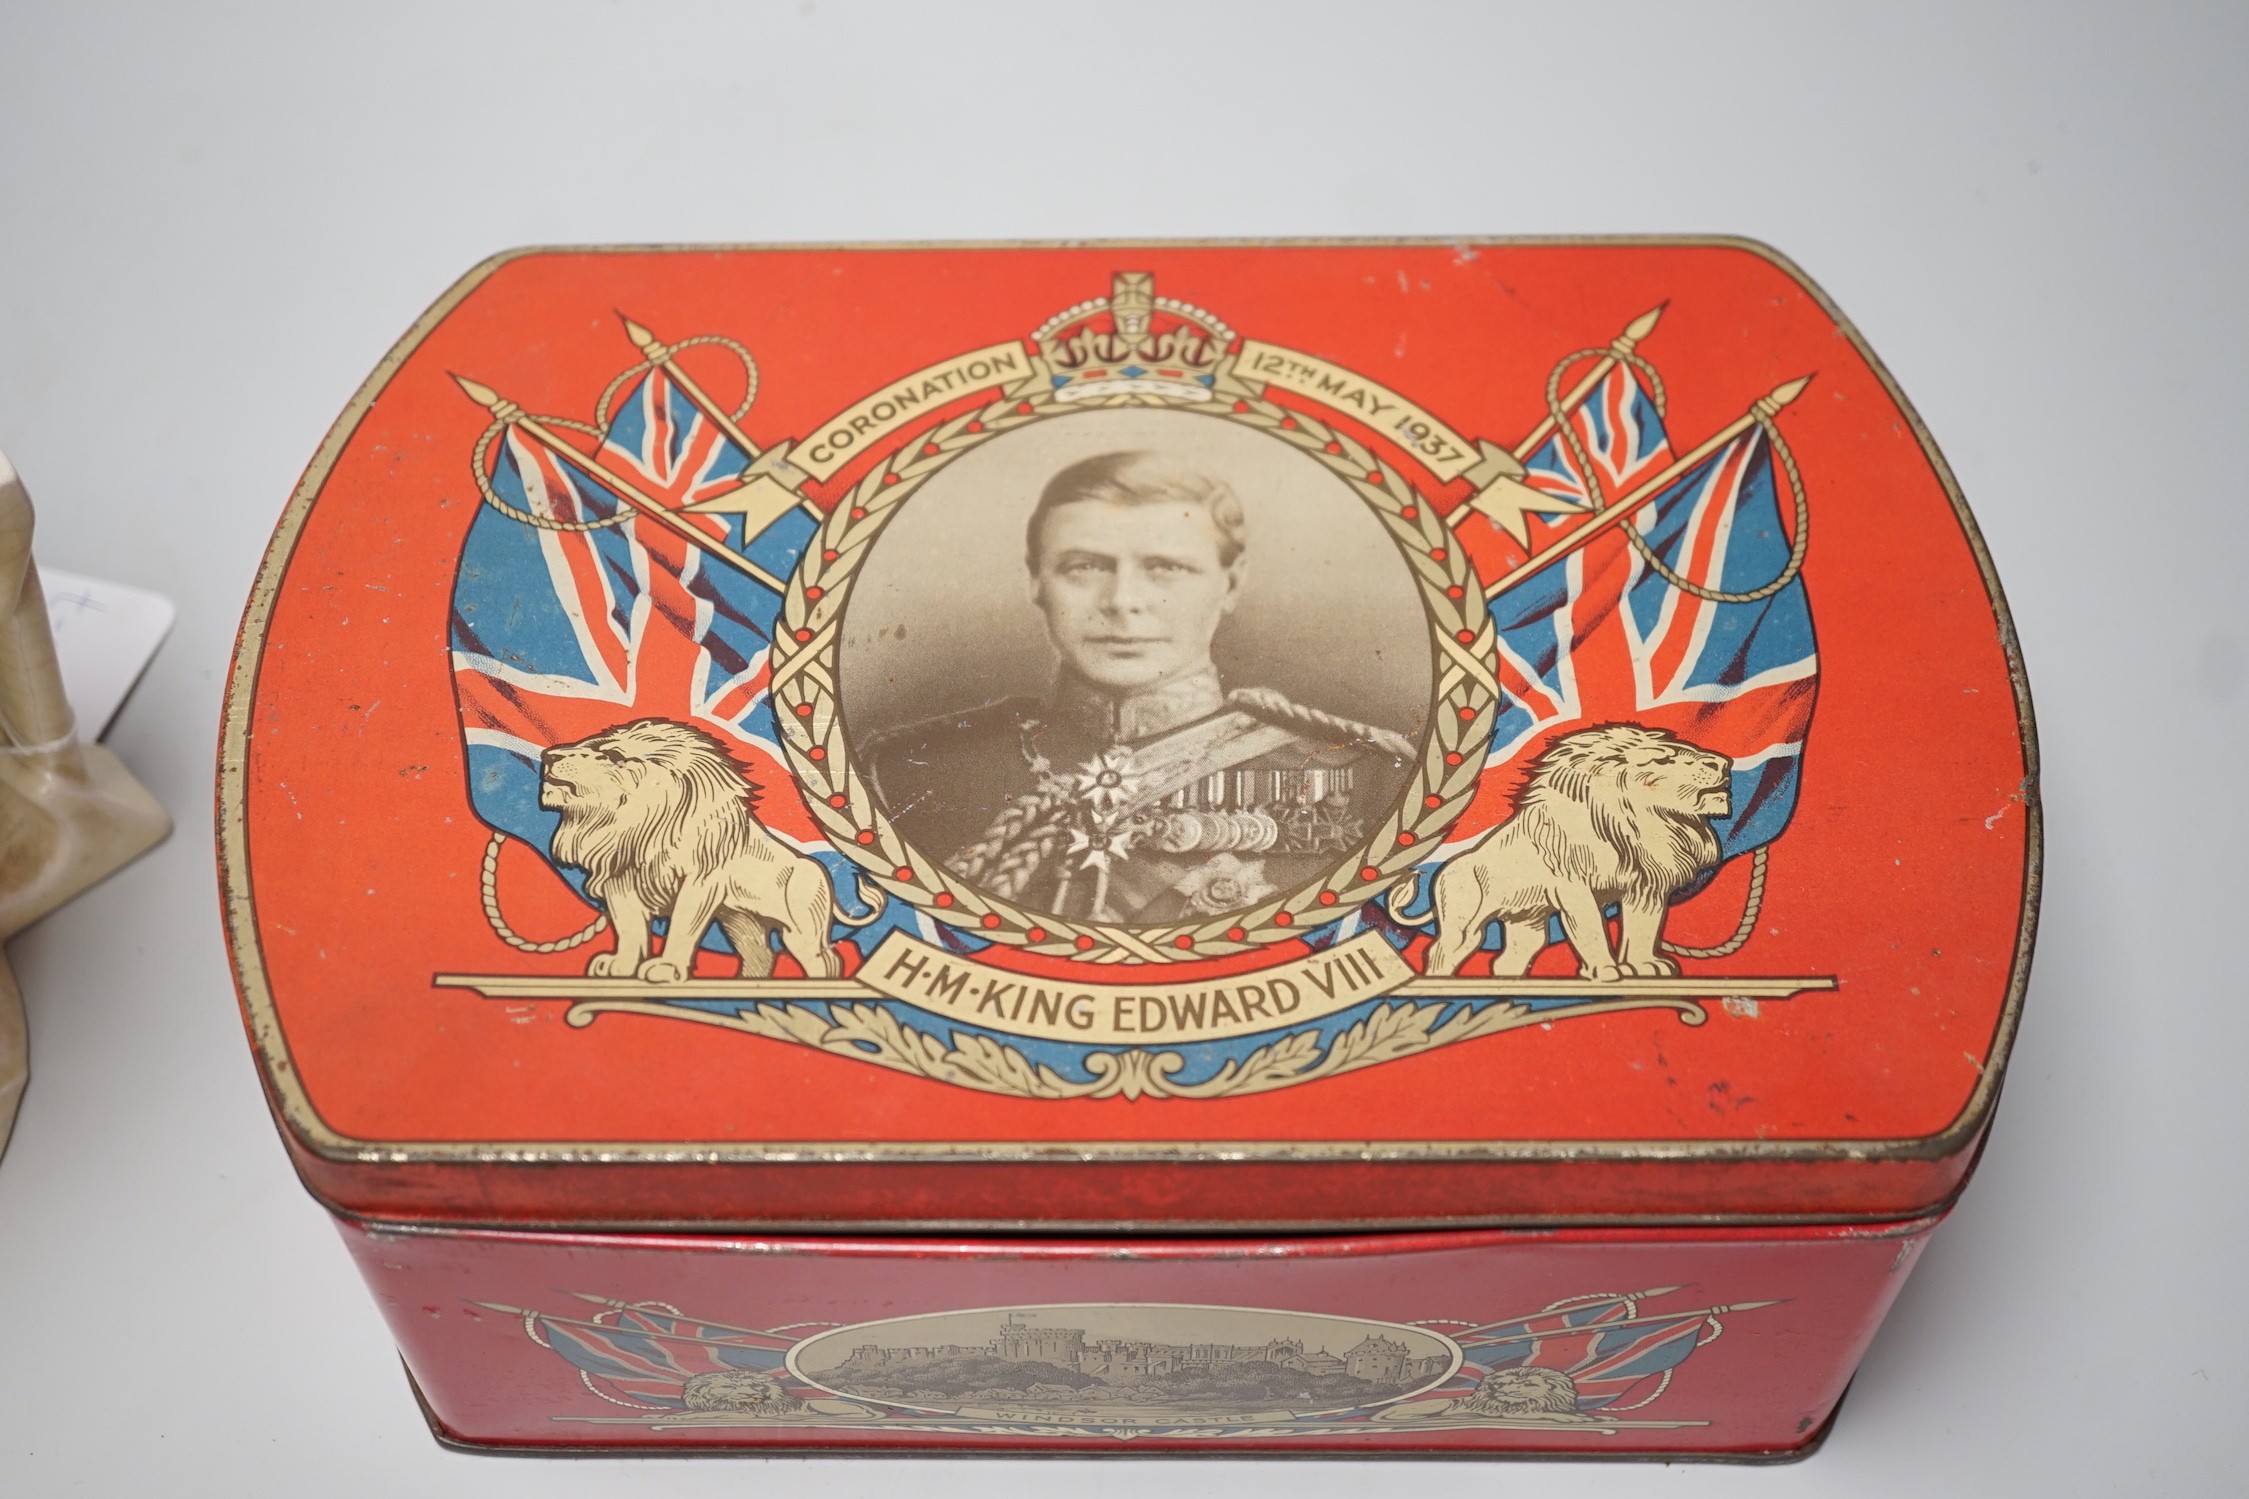 A musical Edward VII Coronation jug playing ' God save the King' and an Edward VIII biscuit tin